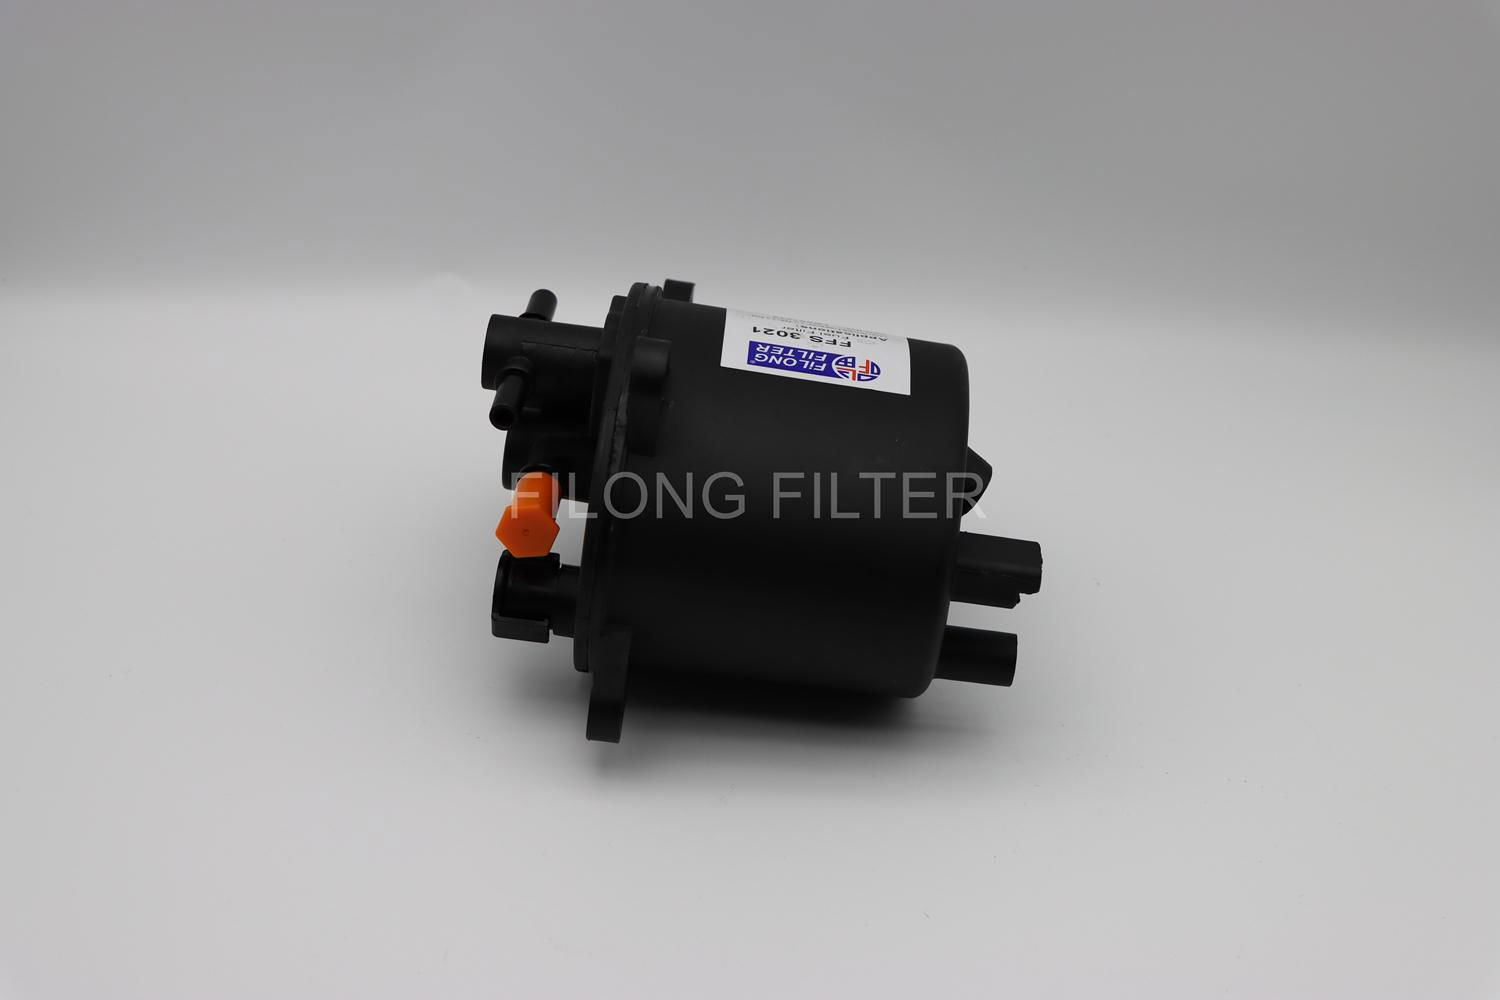  FILONG Manufactory FUEL FILTER  FOR FORD  FFS-3021,6G9Q9155AA, WK12001,KL581,H346WK,	190183,	9656937180,  	1427928,	LR001313,  1770A040, 1770A252,190183,PS974/2,PS10288,ST6134  